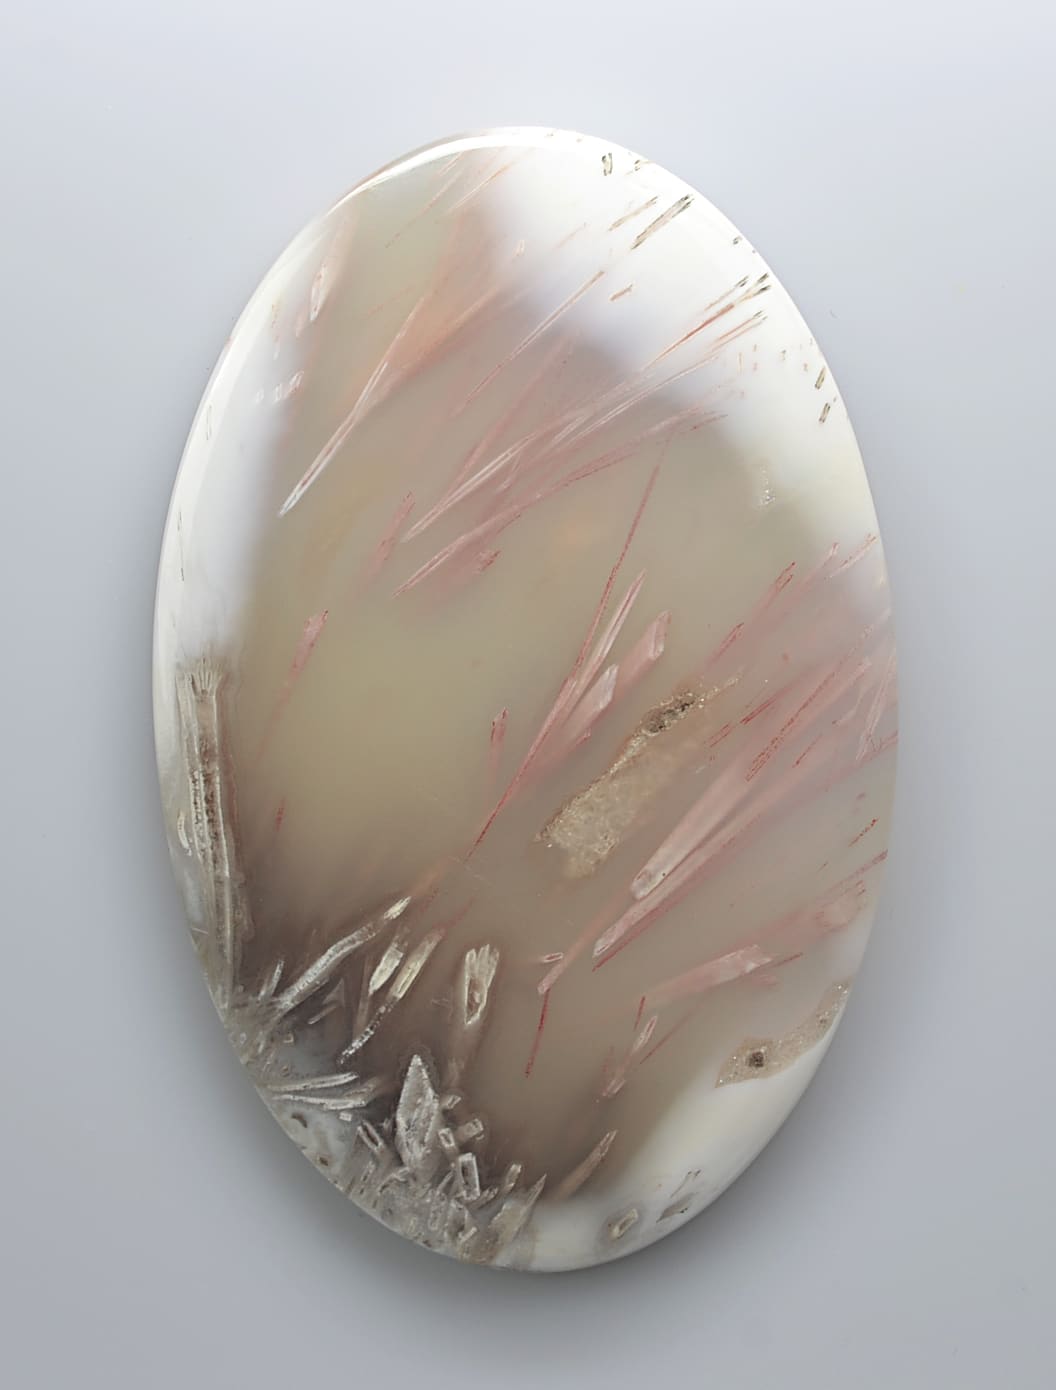 Indonesian Tube Agate 177.60 ct  Oval  Cabochon Collection (2) 76.00 x 44.80 x 5.20 mm c074